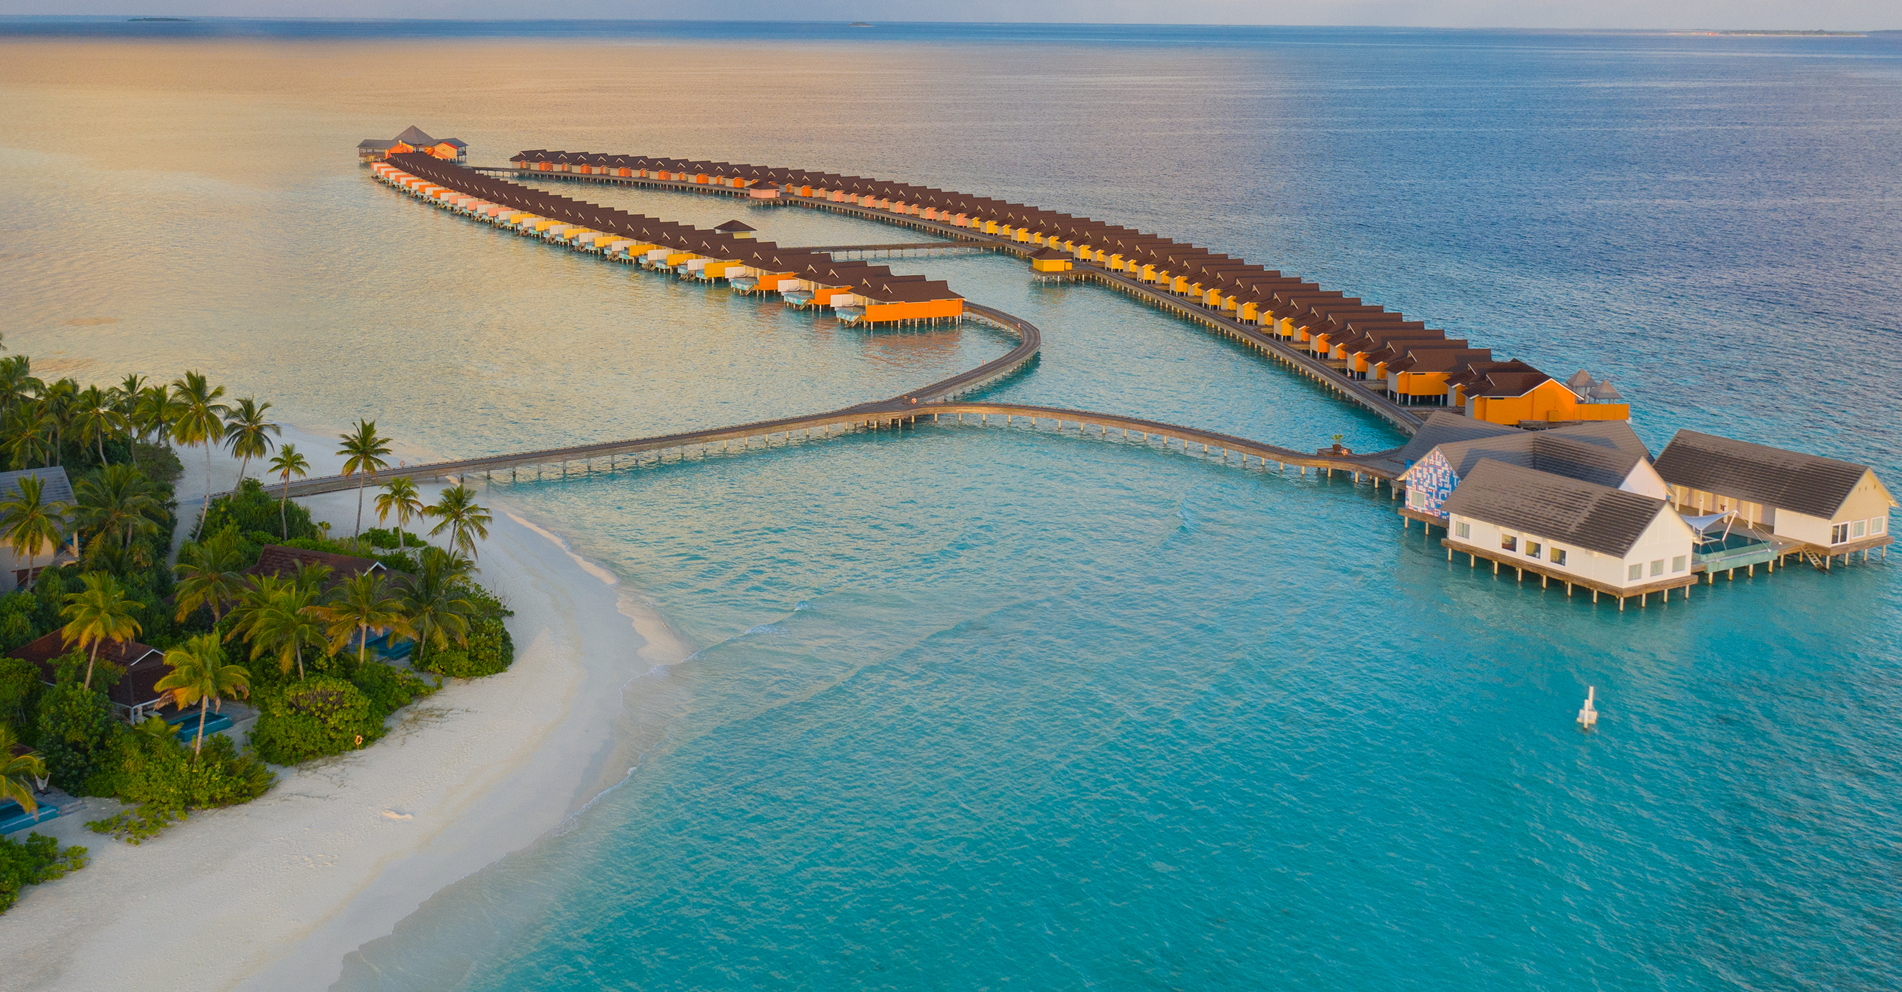 The Standard, Huruvalhi Maldives will reopen on 5 December 2020. The luxury resort, a 30-minute journey by seaplane from Velana International Airport, is nestled between the Raa and Baa Atolls, on a naturally protected island. Click to enlarge.